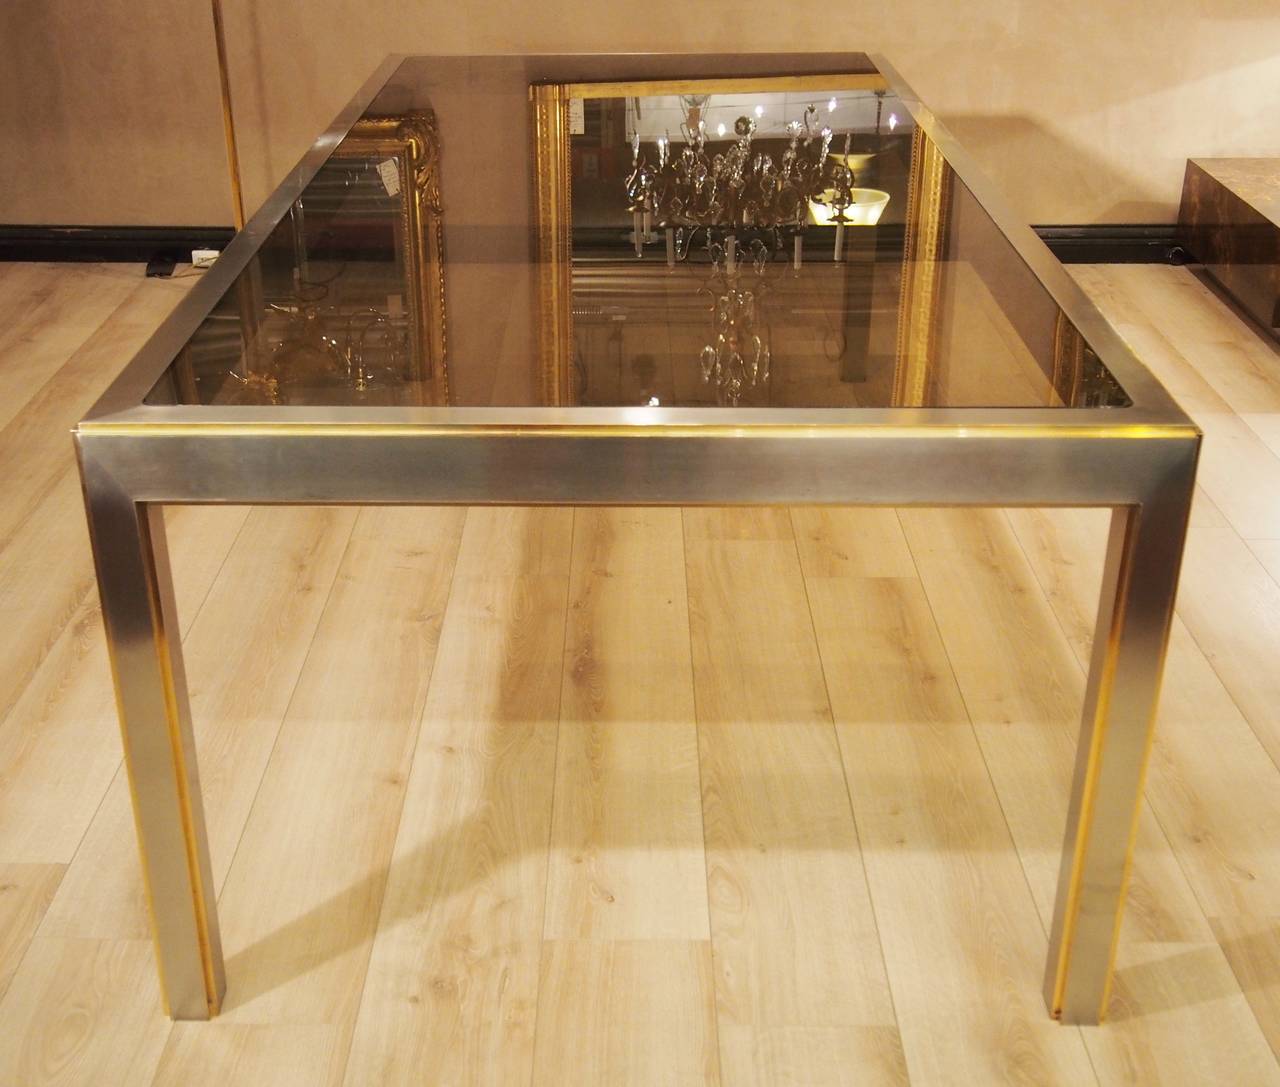 Smoked Glass Stunning Dining Table in Stainless Steel, 1965-1970 For Sale